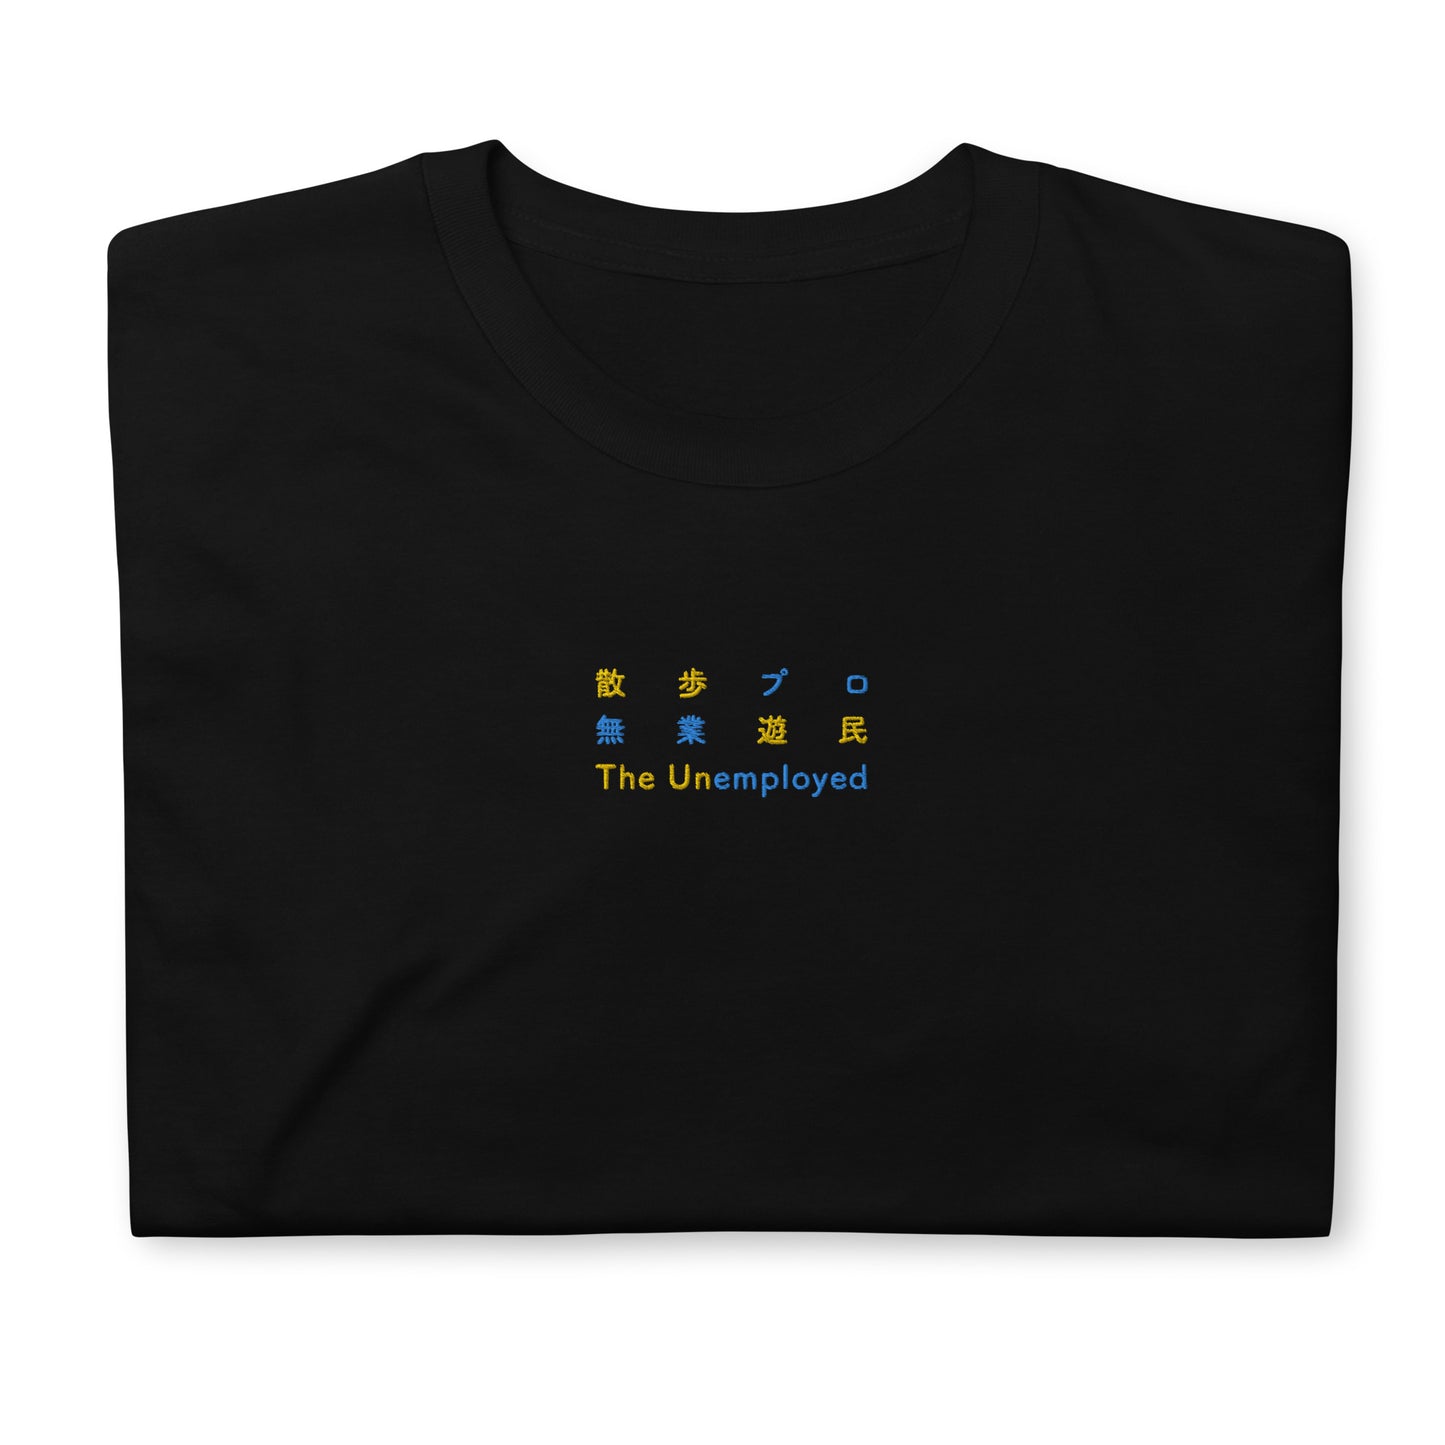 Black High Quality Tee - Front Design with Yellow/Blue Embroidery "The Unemployed" in three languages